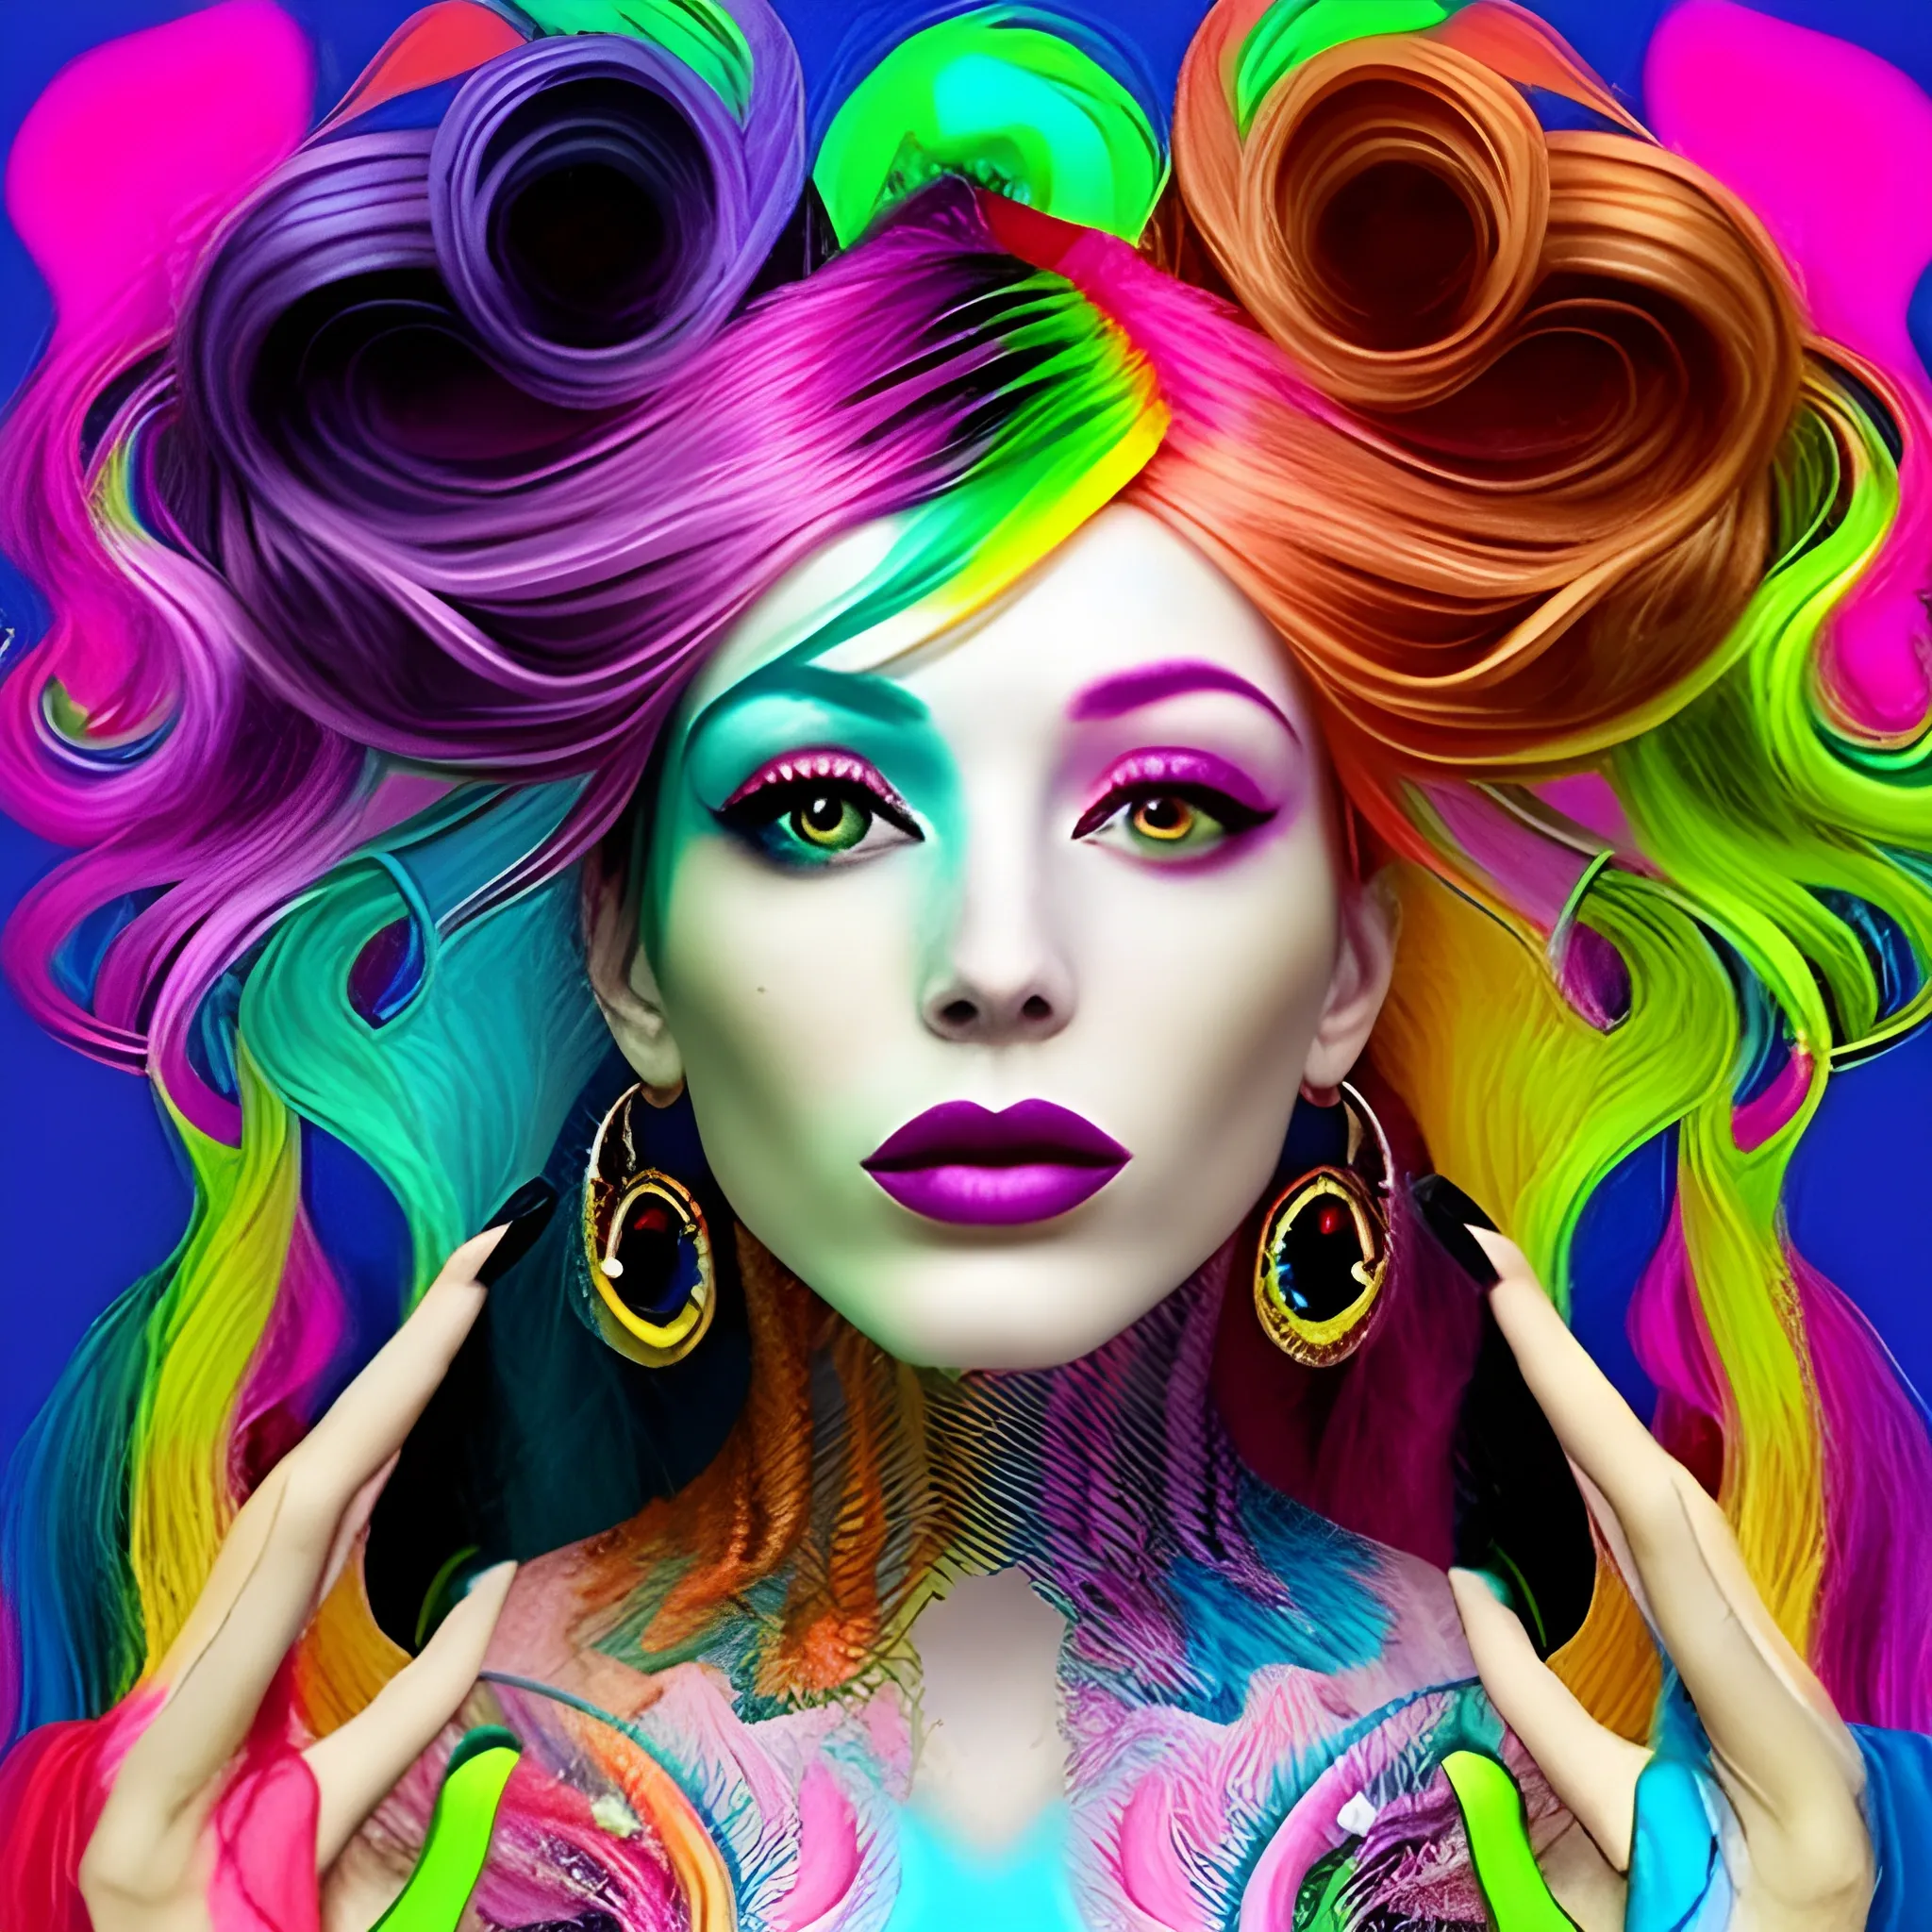 the woman is wearing multicolored hair, vibrant color scheme, Trippy